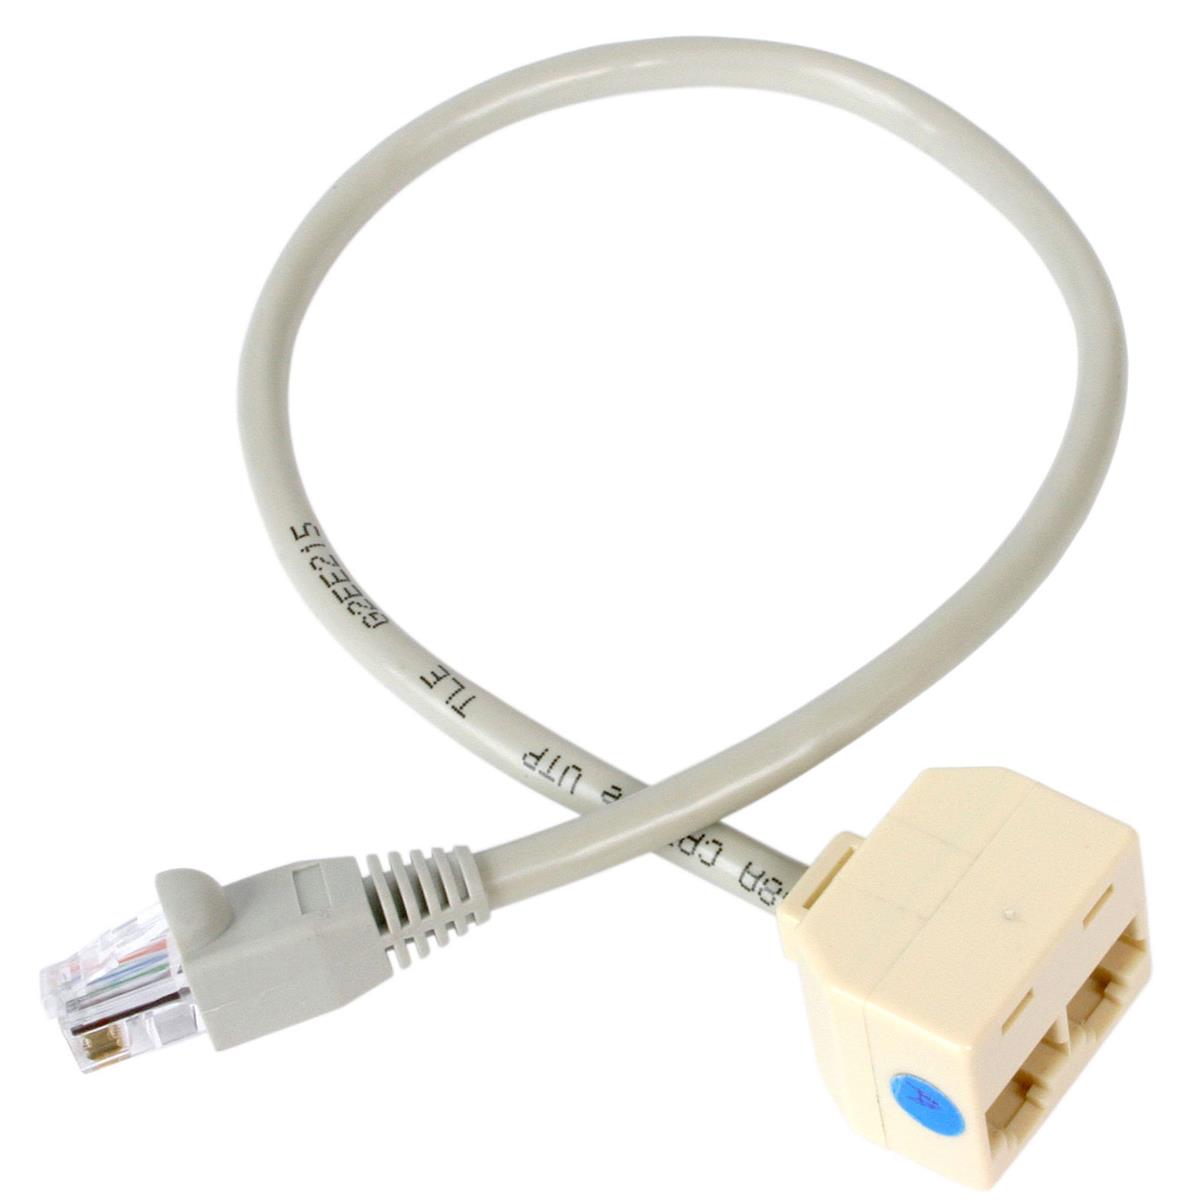 

StarTech 13" RJ45 Male to 2x RJ-45 Female Splitter Adapter Cable